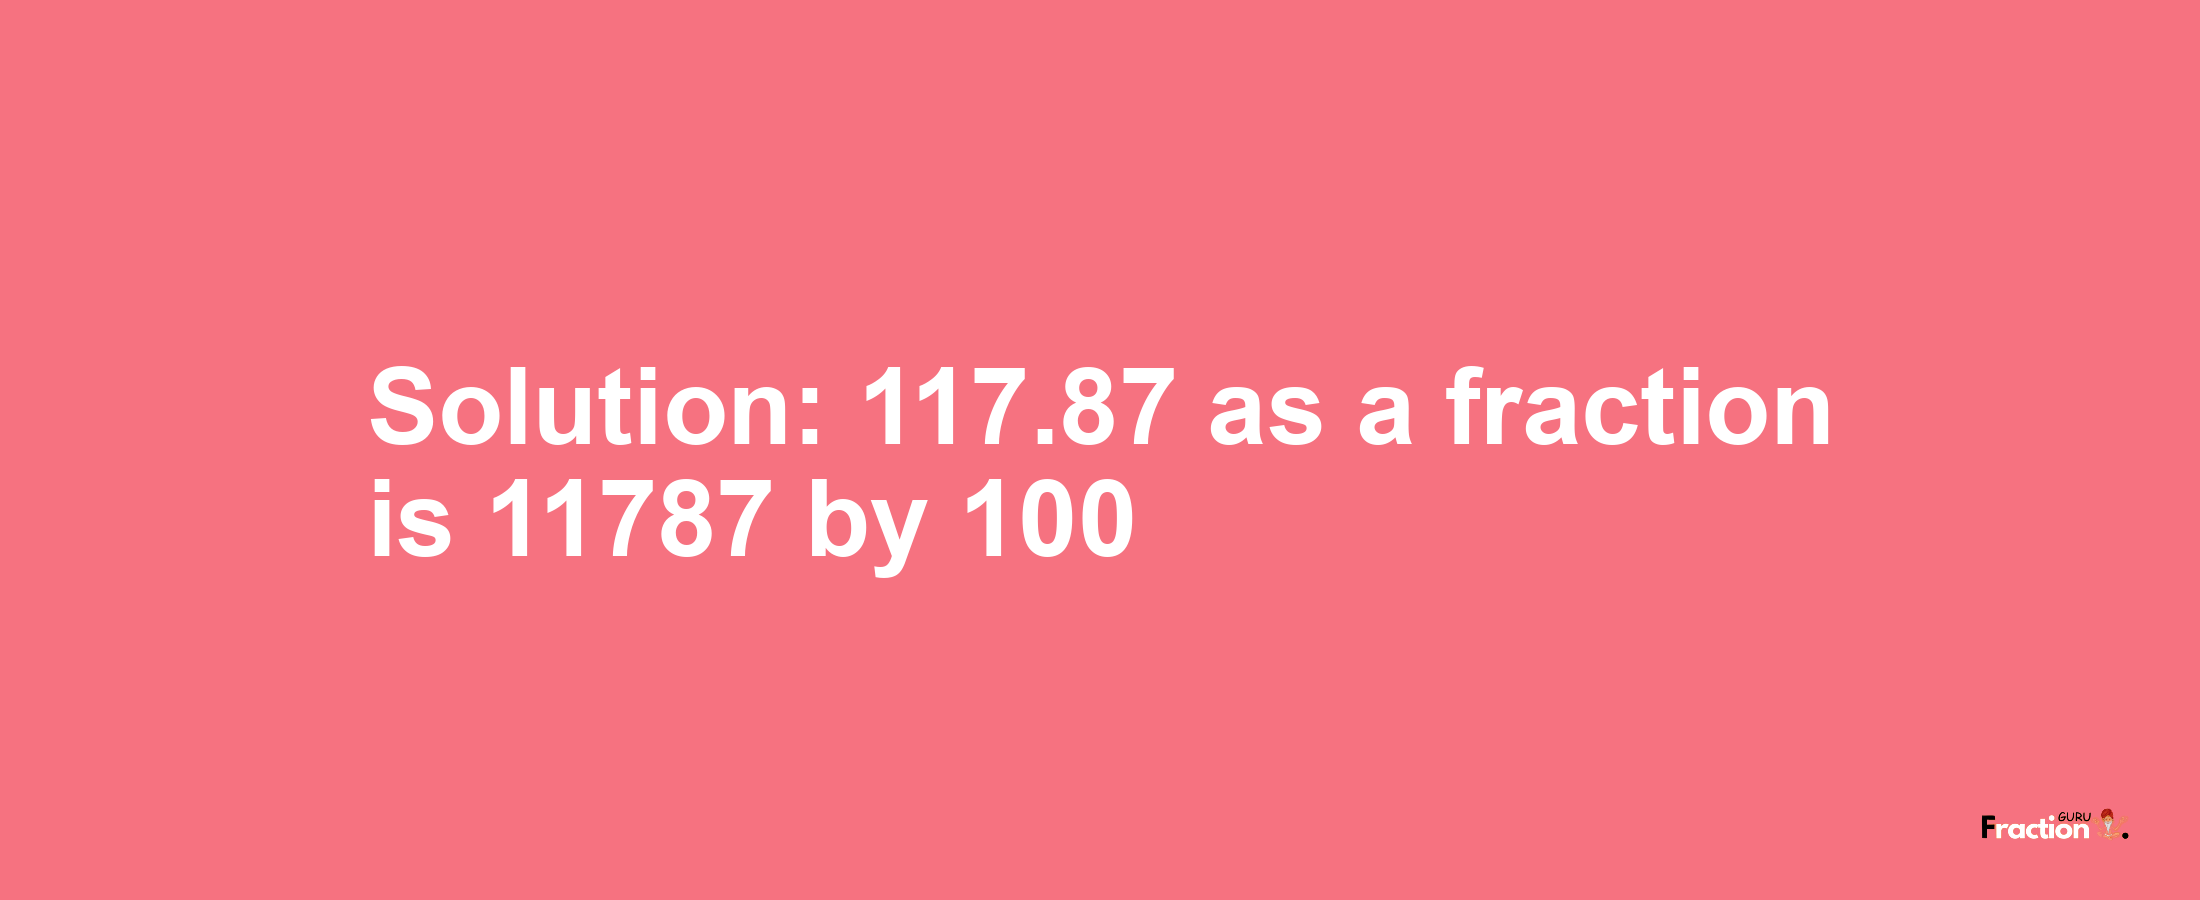 Solution:117.87 as a fraction is 11787/100